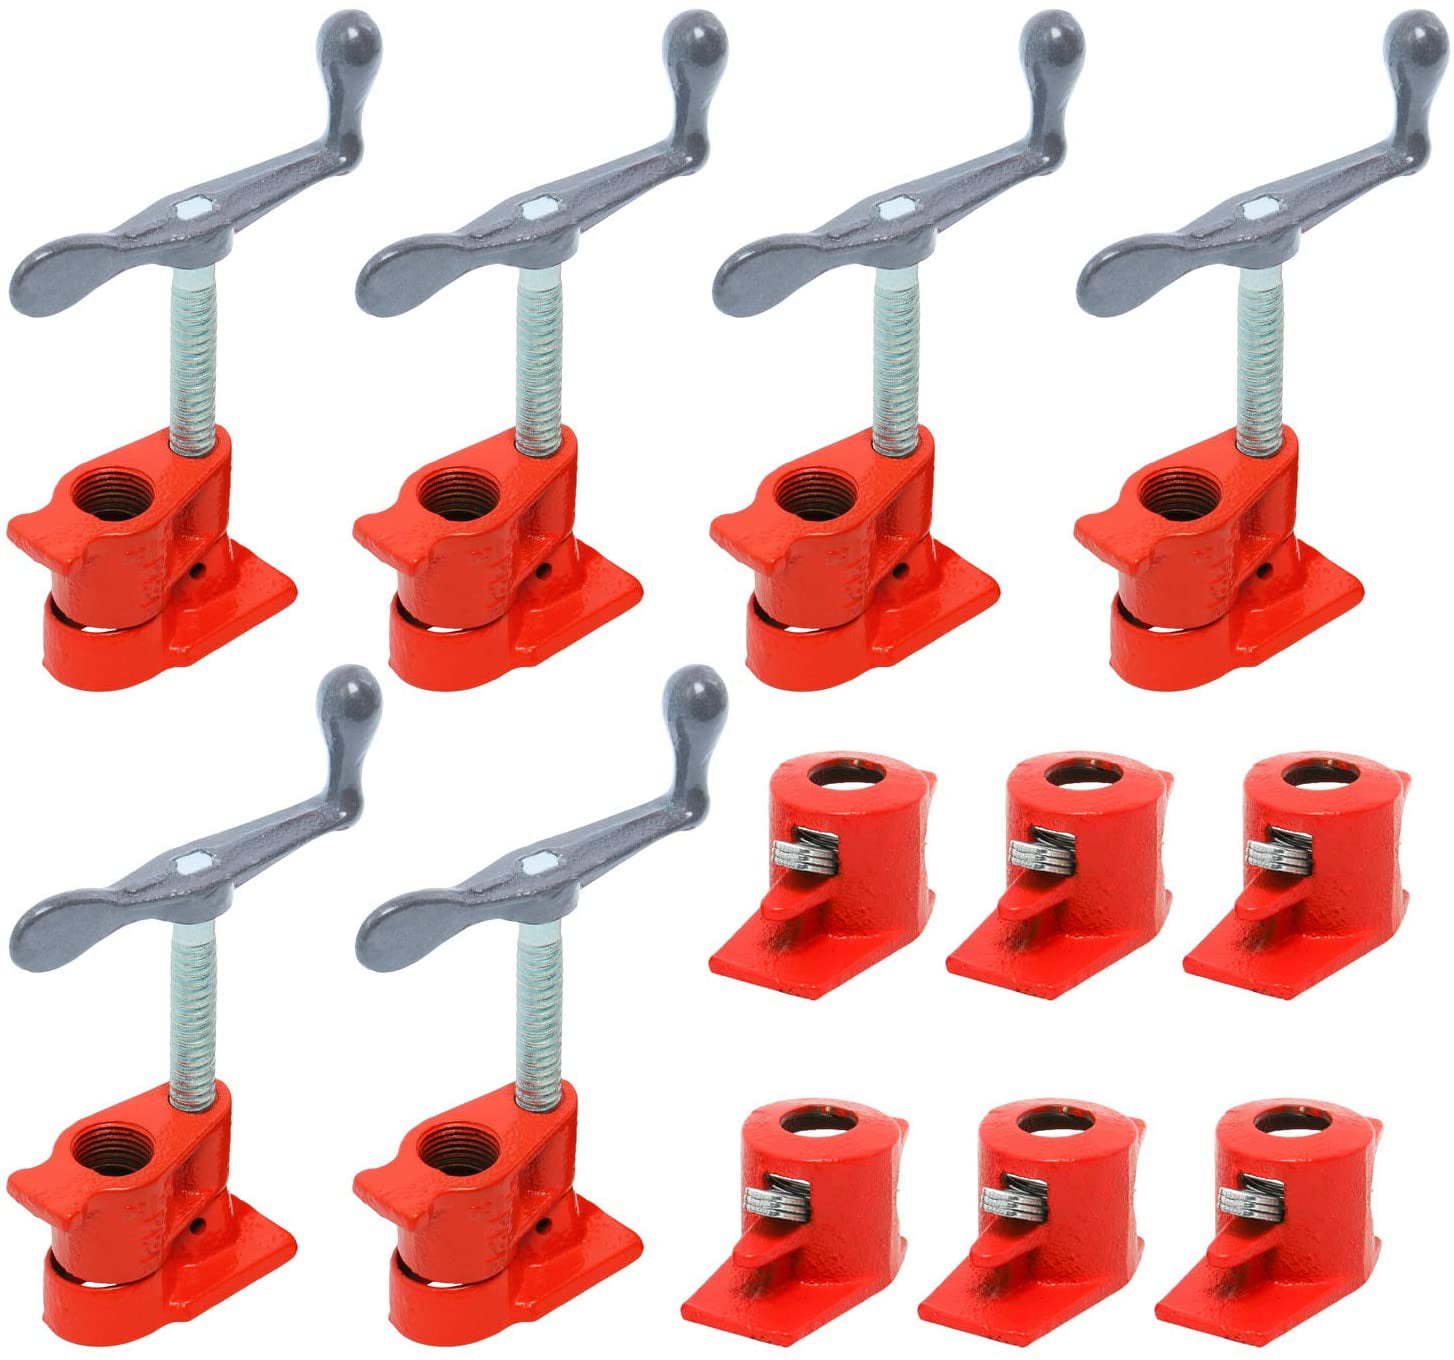 4 Pack 3/4" Wood Gluing Pipe Clamp Set Heavy Duty PRO Woodworking Cast Iron 